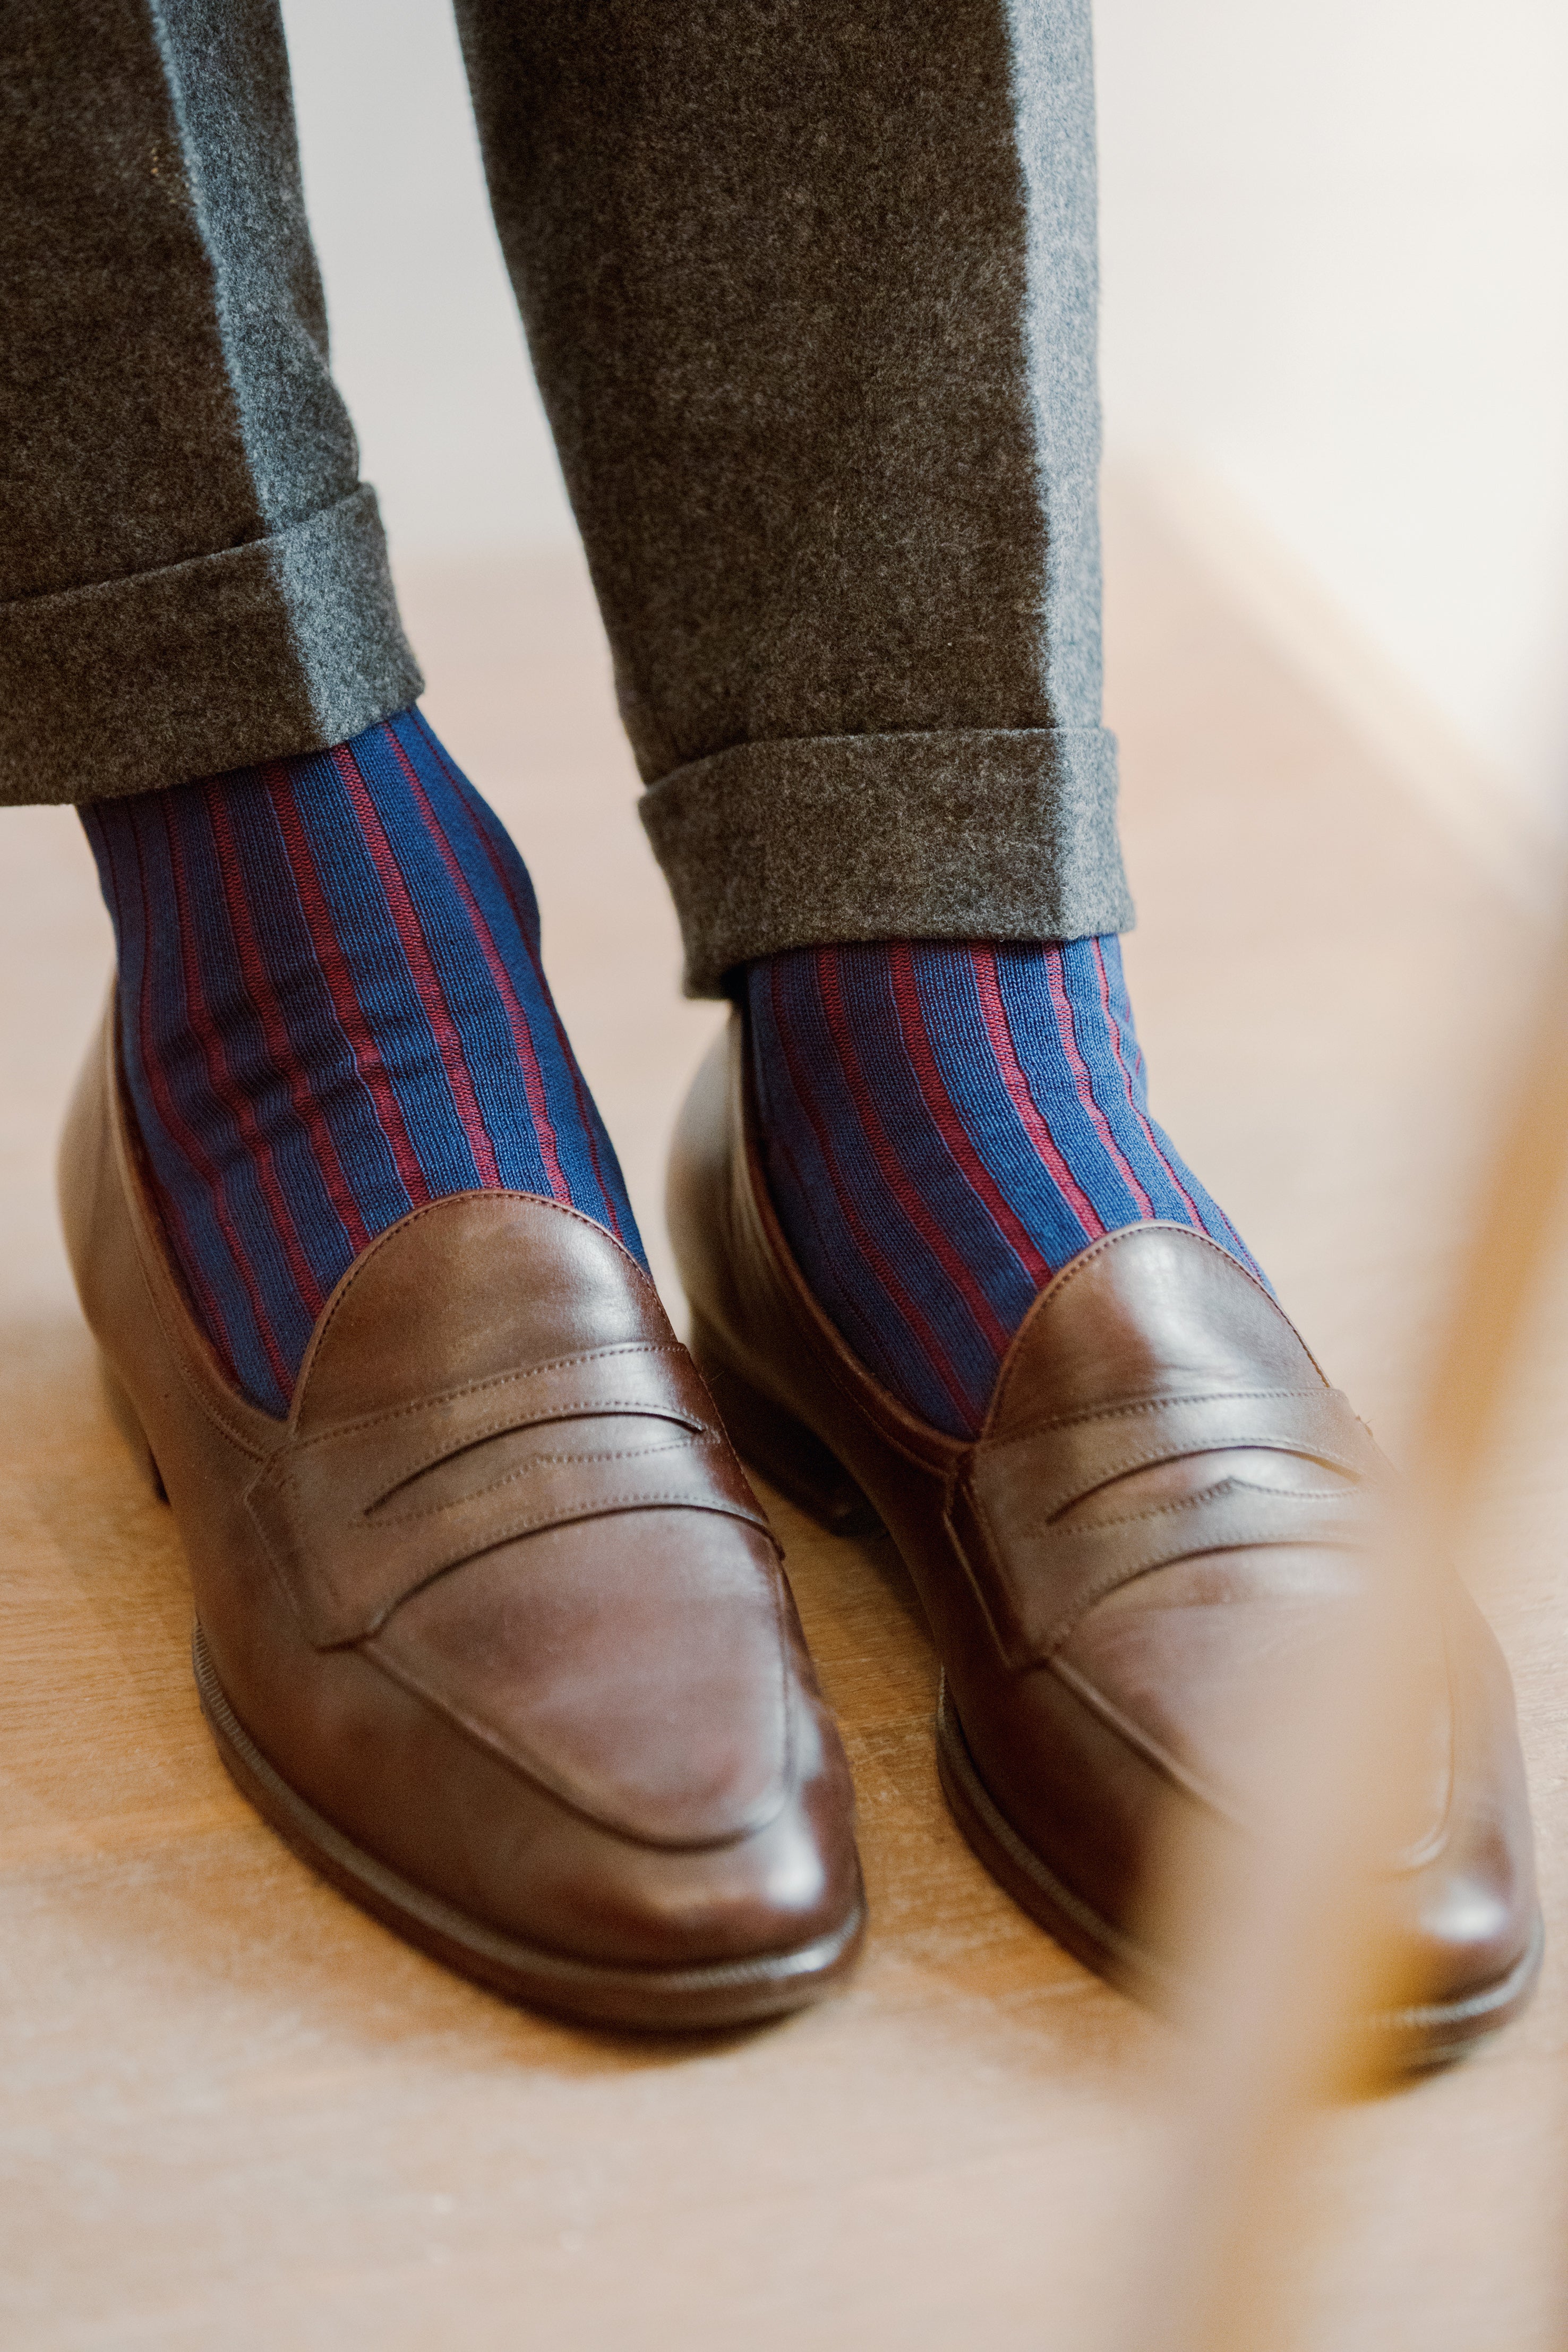 Mid-calf red and blue striped socks - cotton lisle - super durable ...